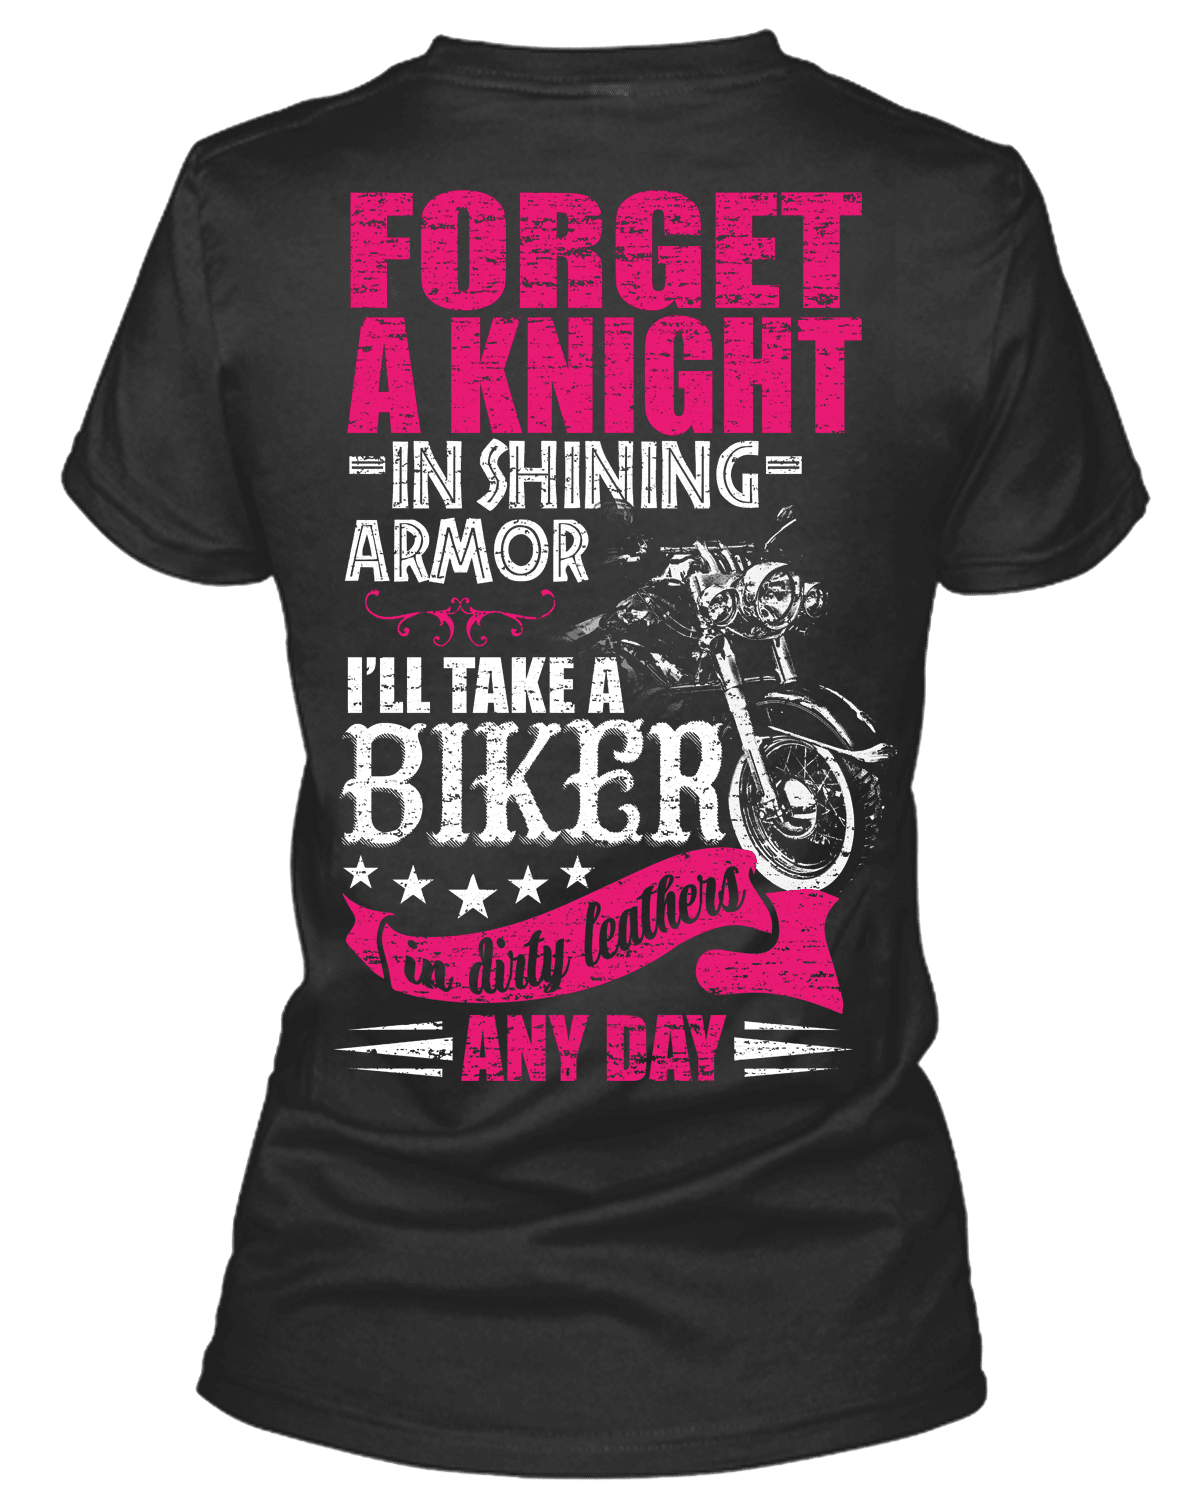 Forget A Knight in Shining Armor, I’ll Take a Biker in Dirty Leathers Any Day T-Shirt - American Legend Rider